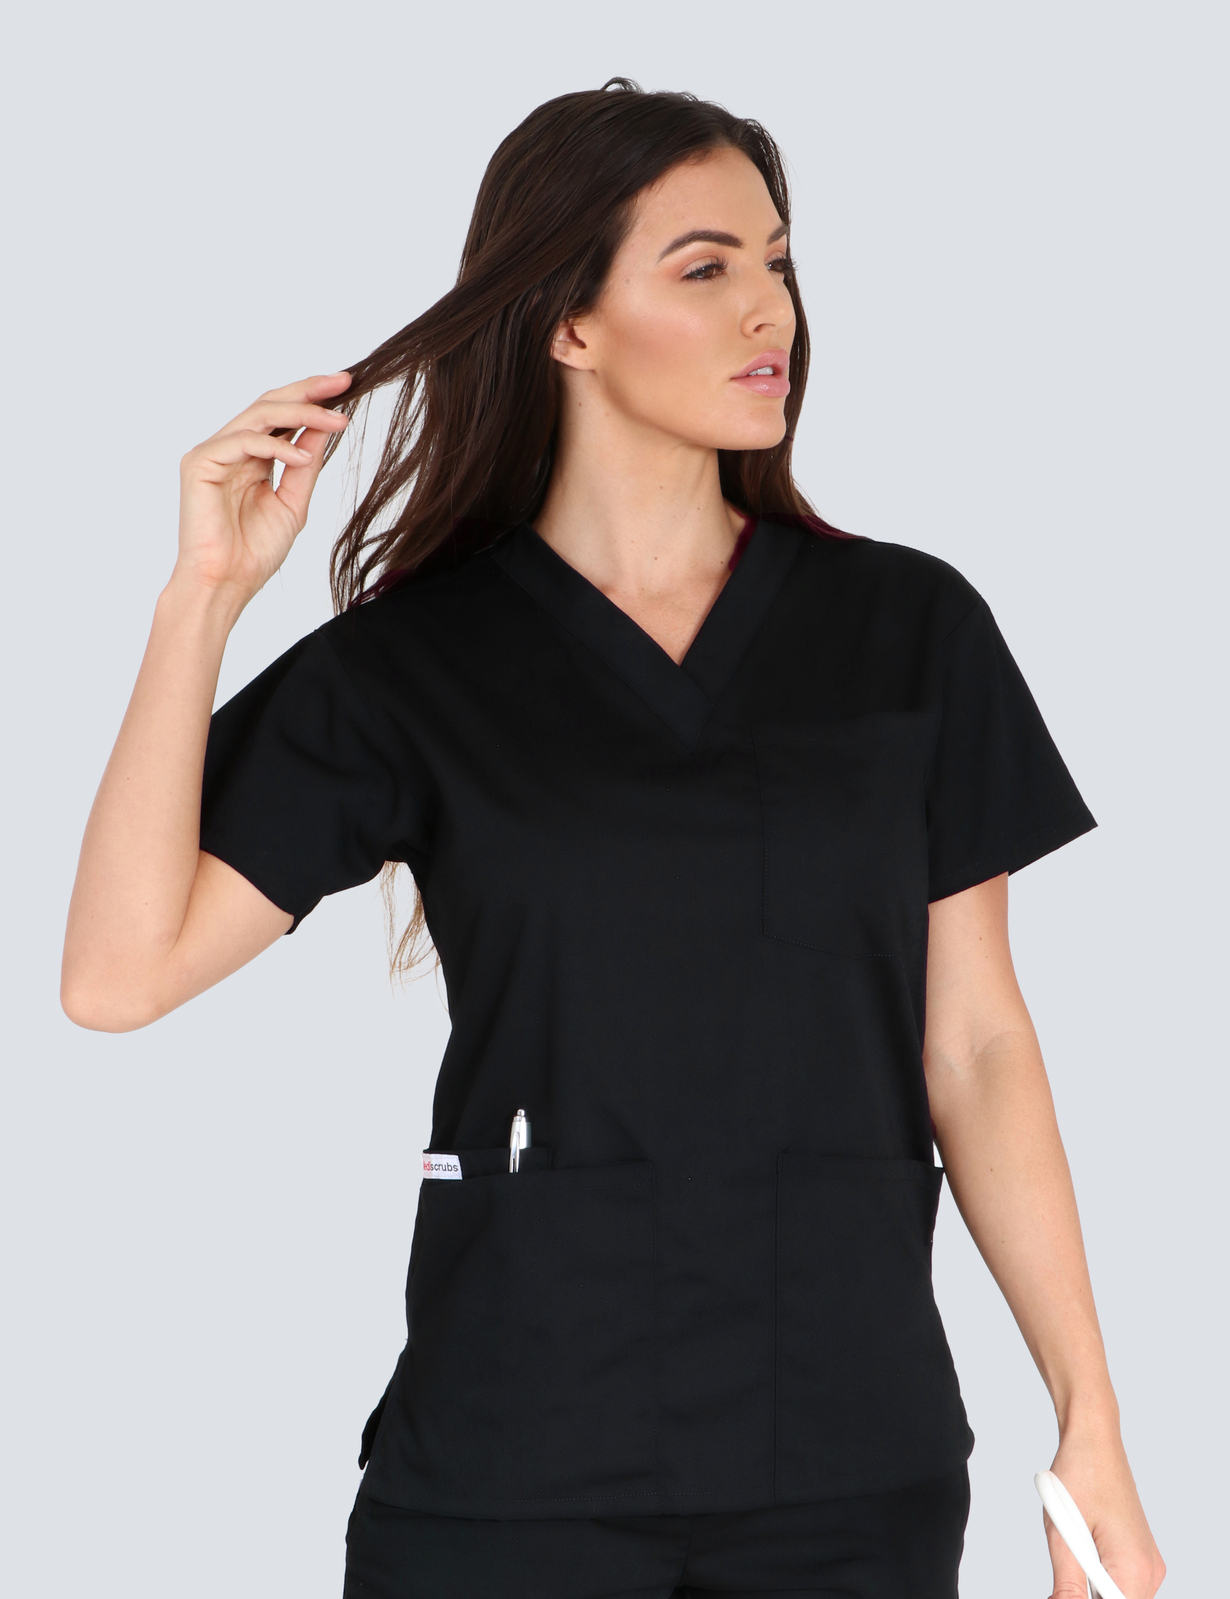 RBWH - Nuclear Medicine Department (4 Pocket Top in Black incl Logos)